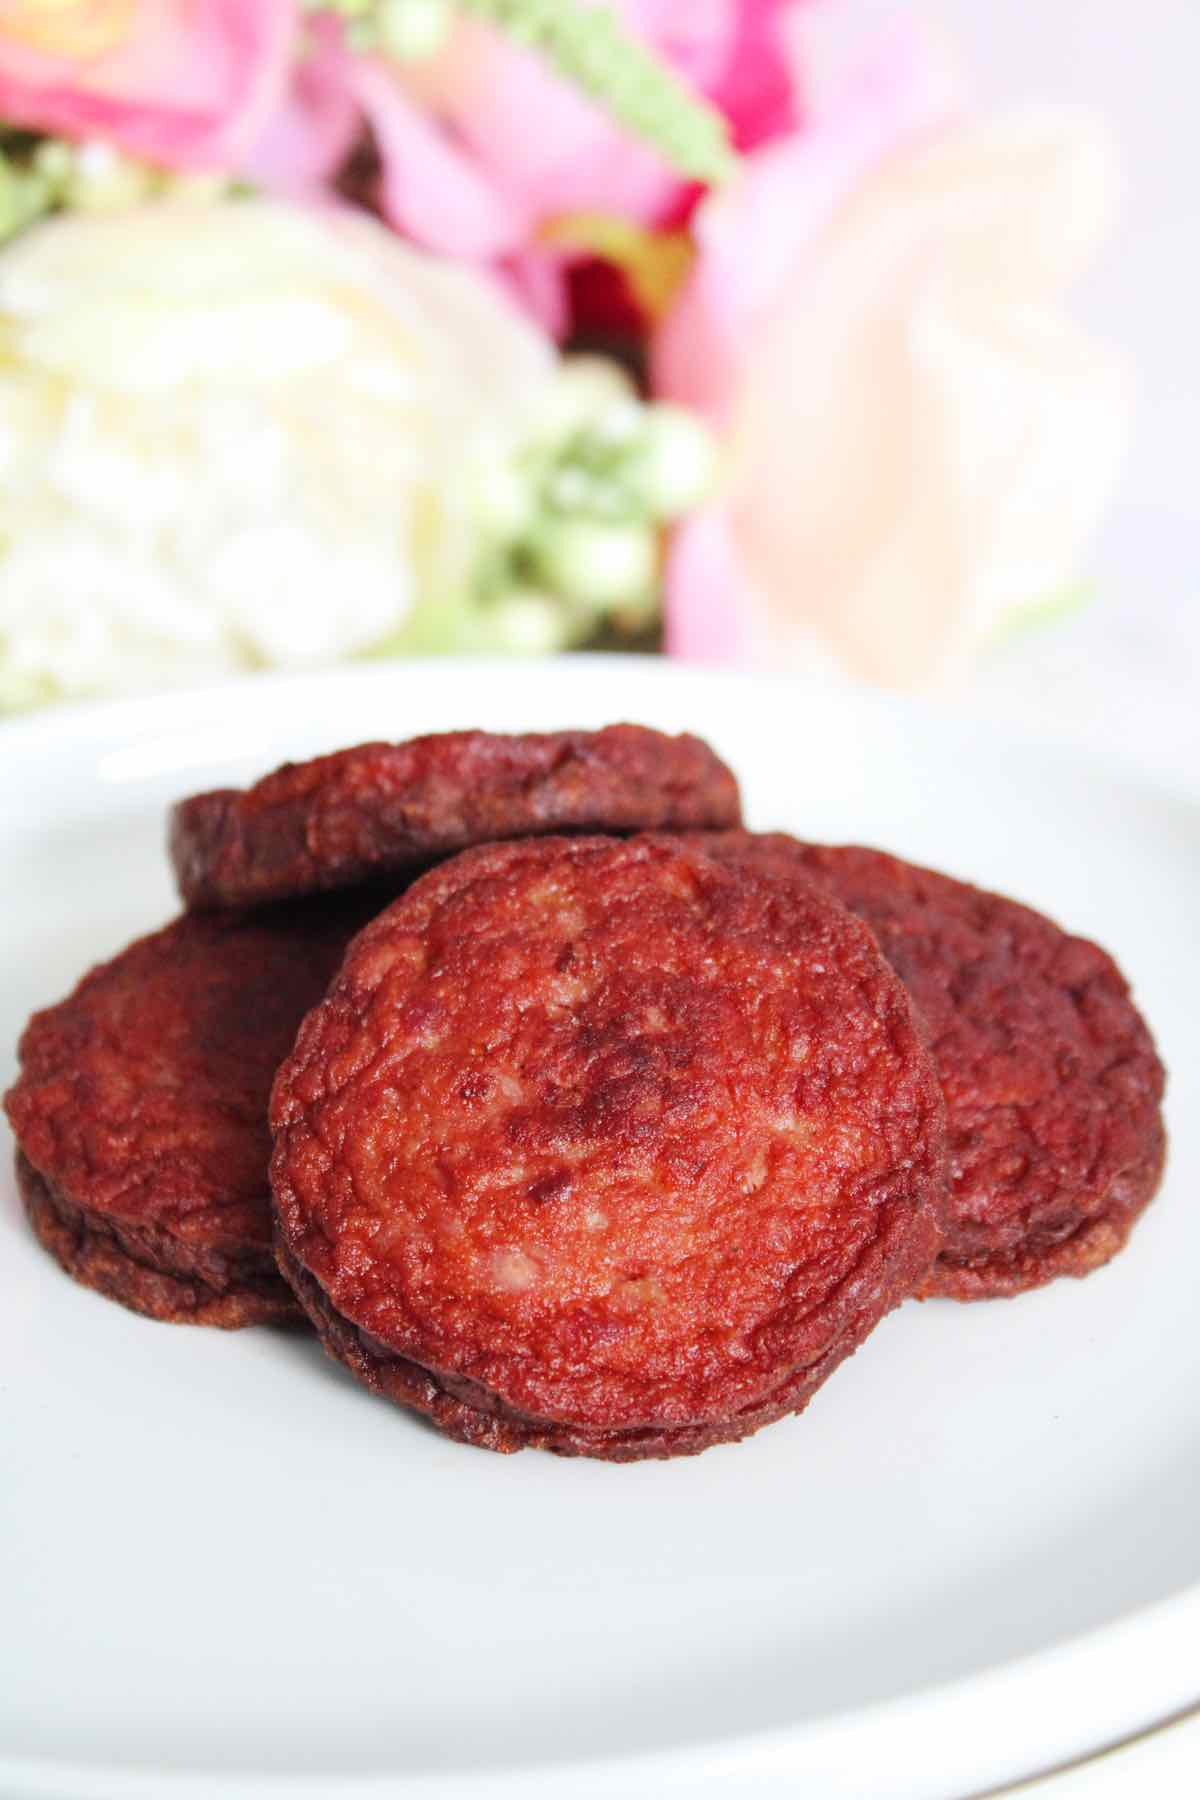 Learn how to make Dominican fried salami with just 2 ingredients.